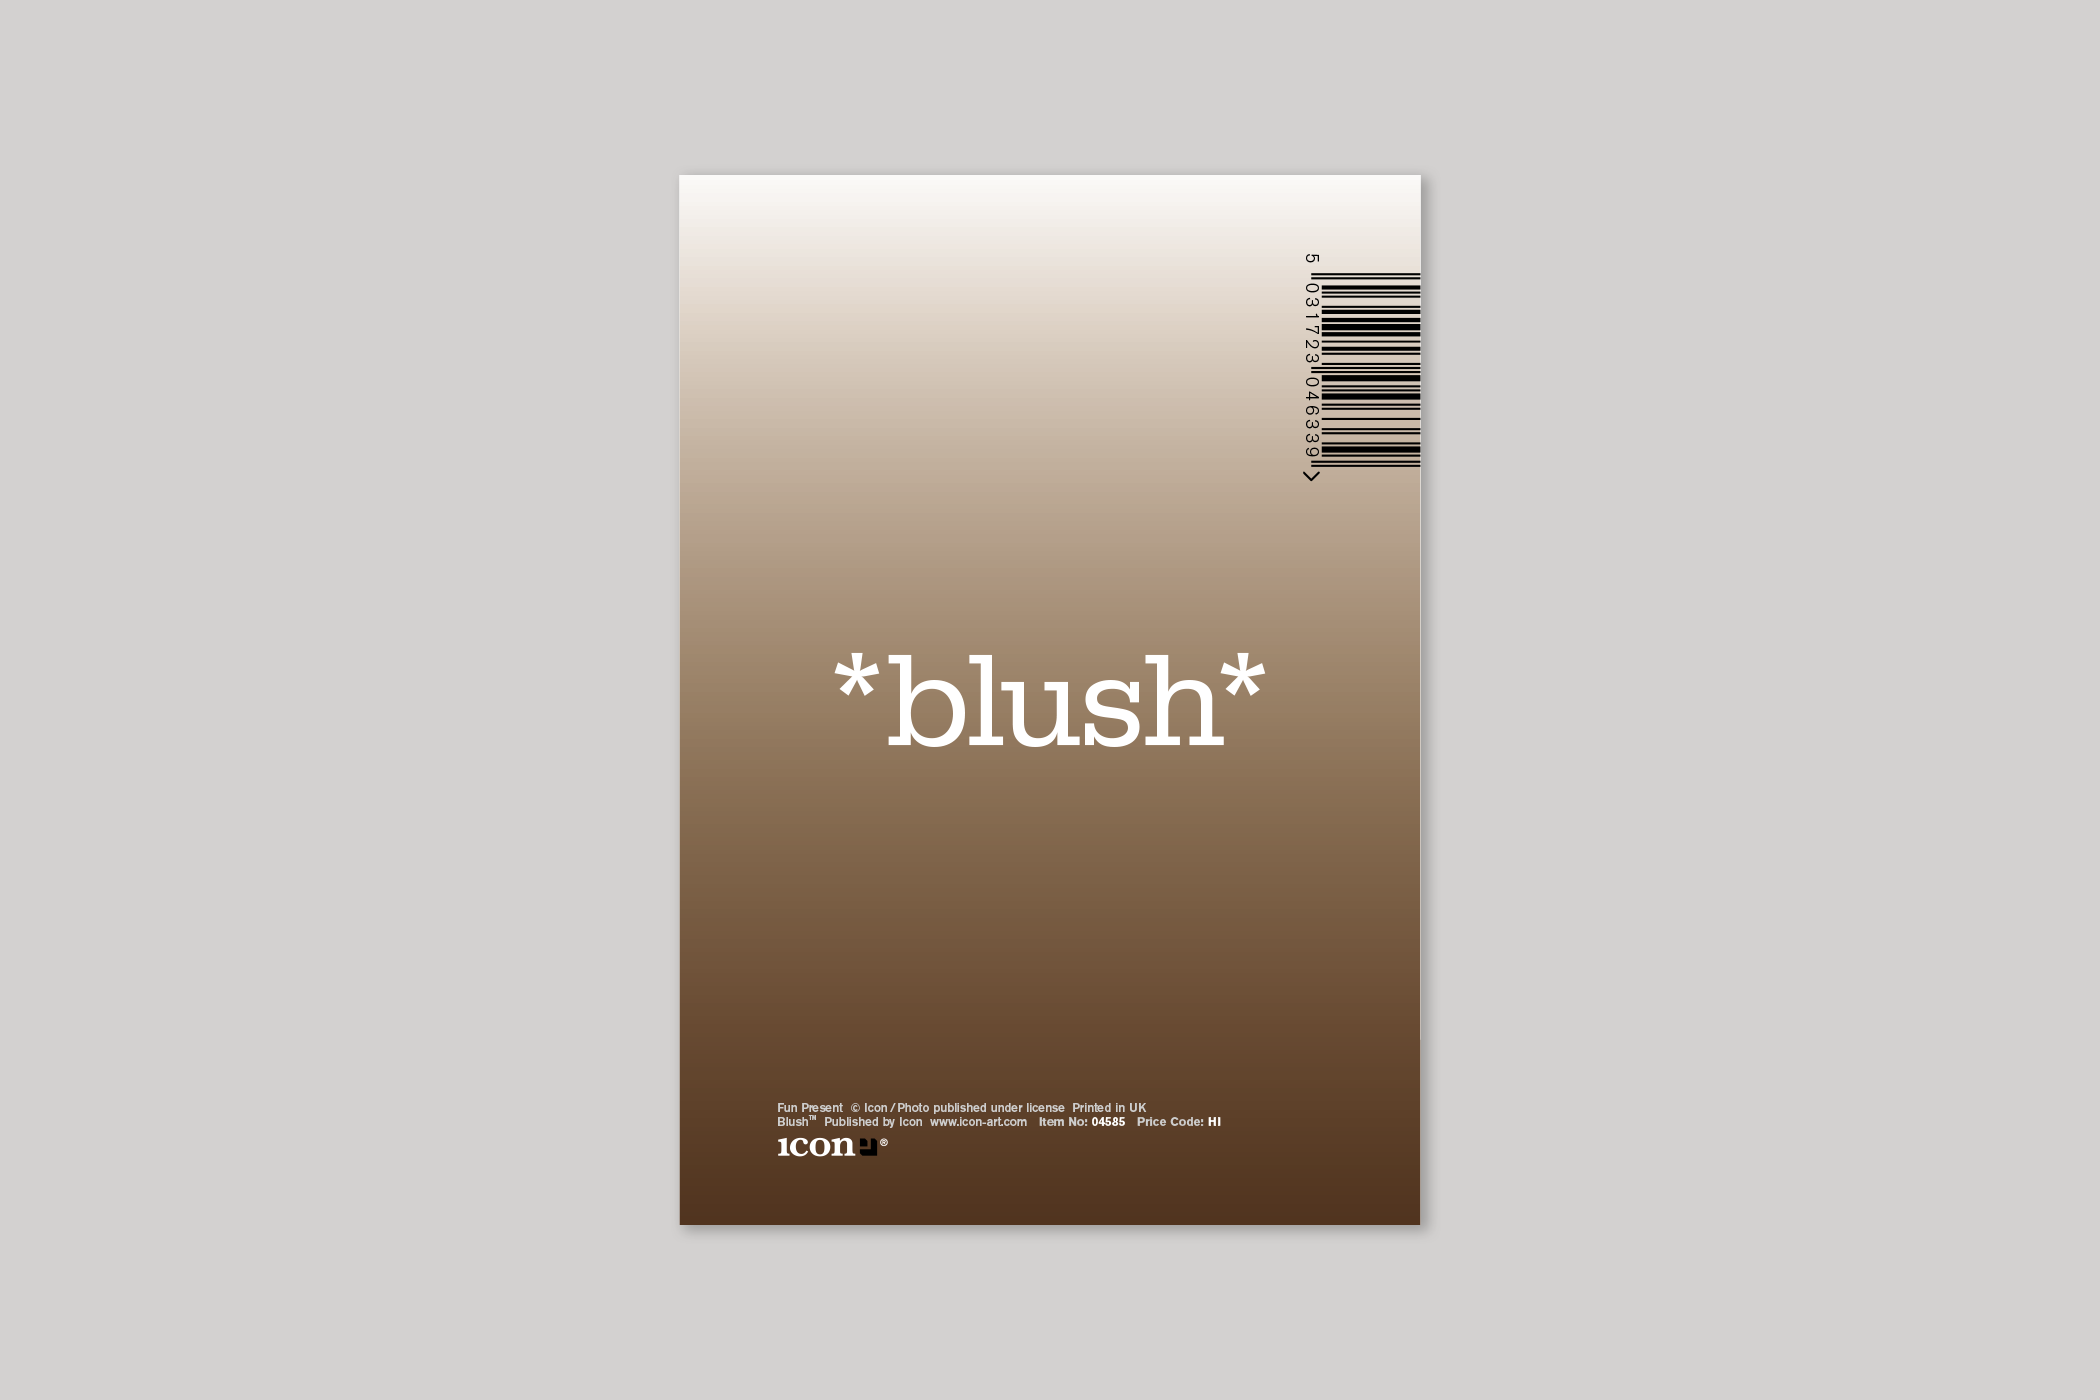 Fun Present from Blush humour range of greeting cards by Icon, with envelope.